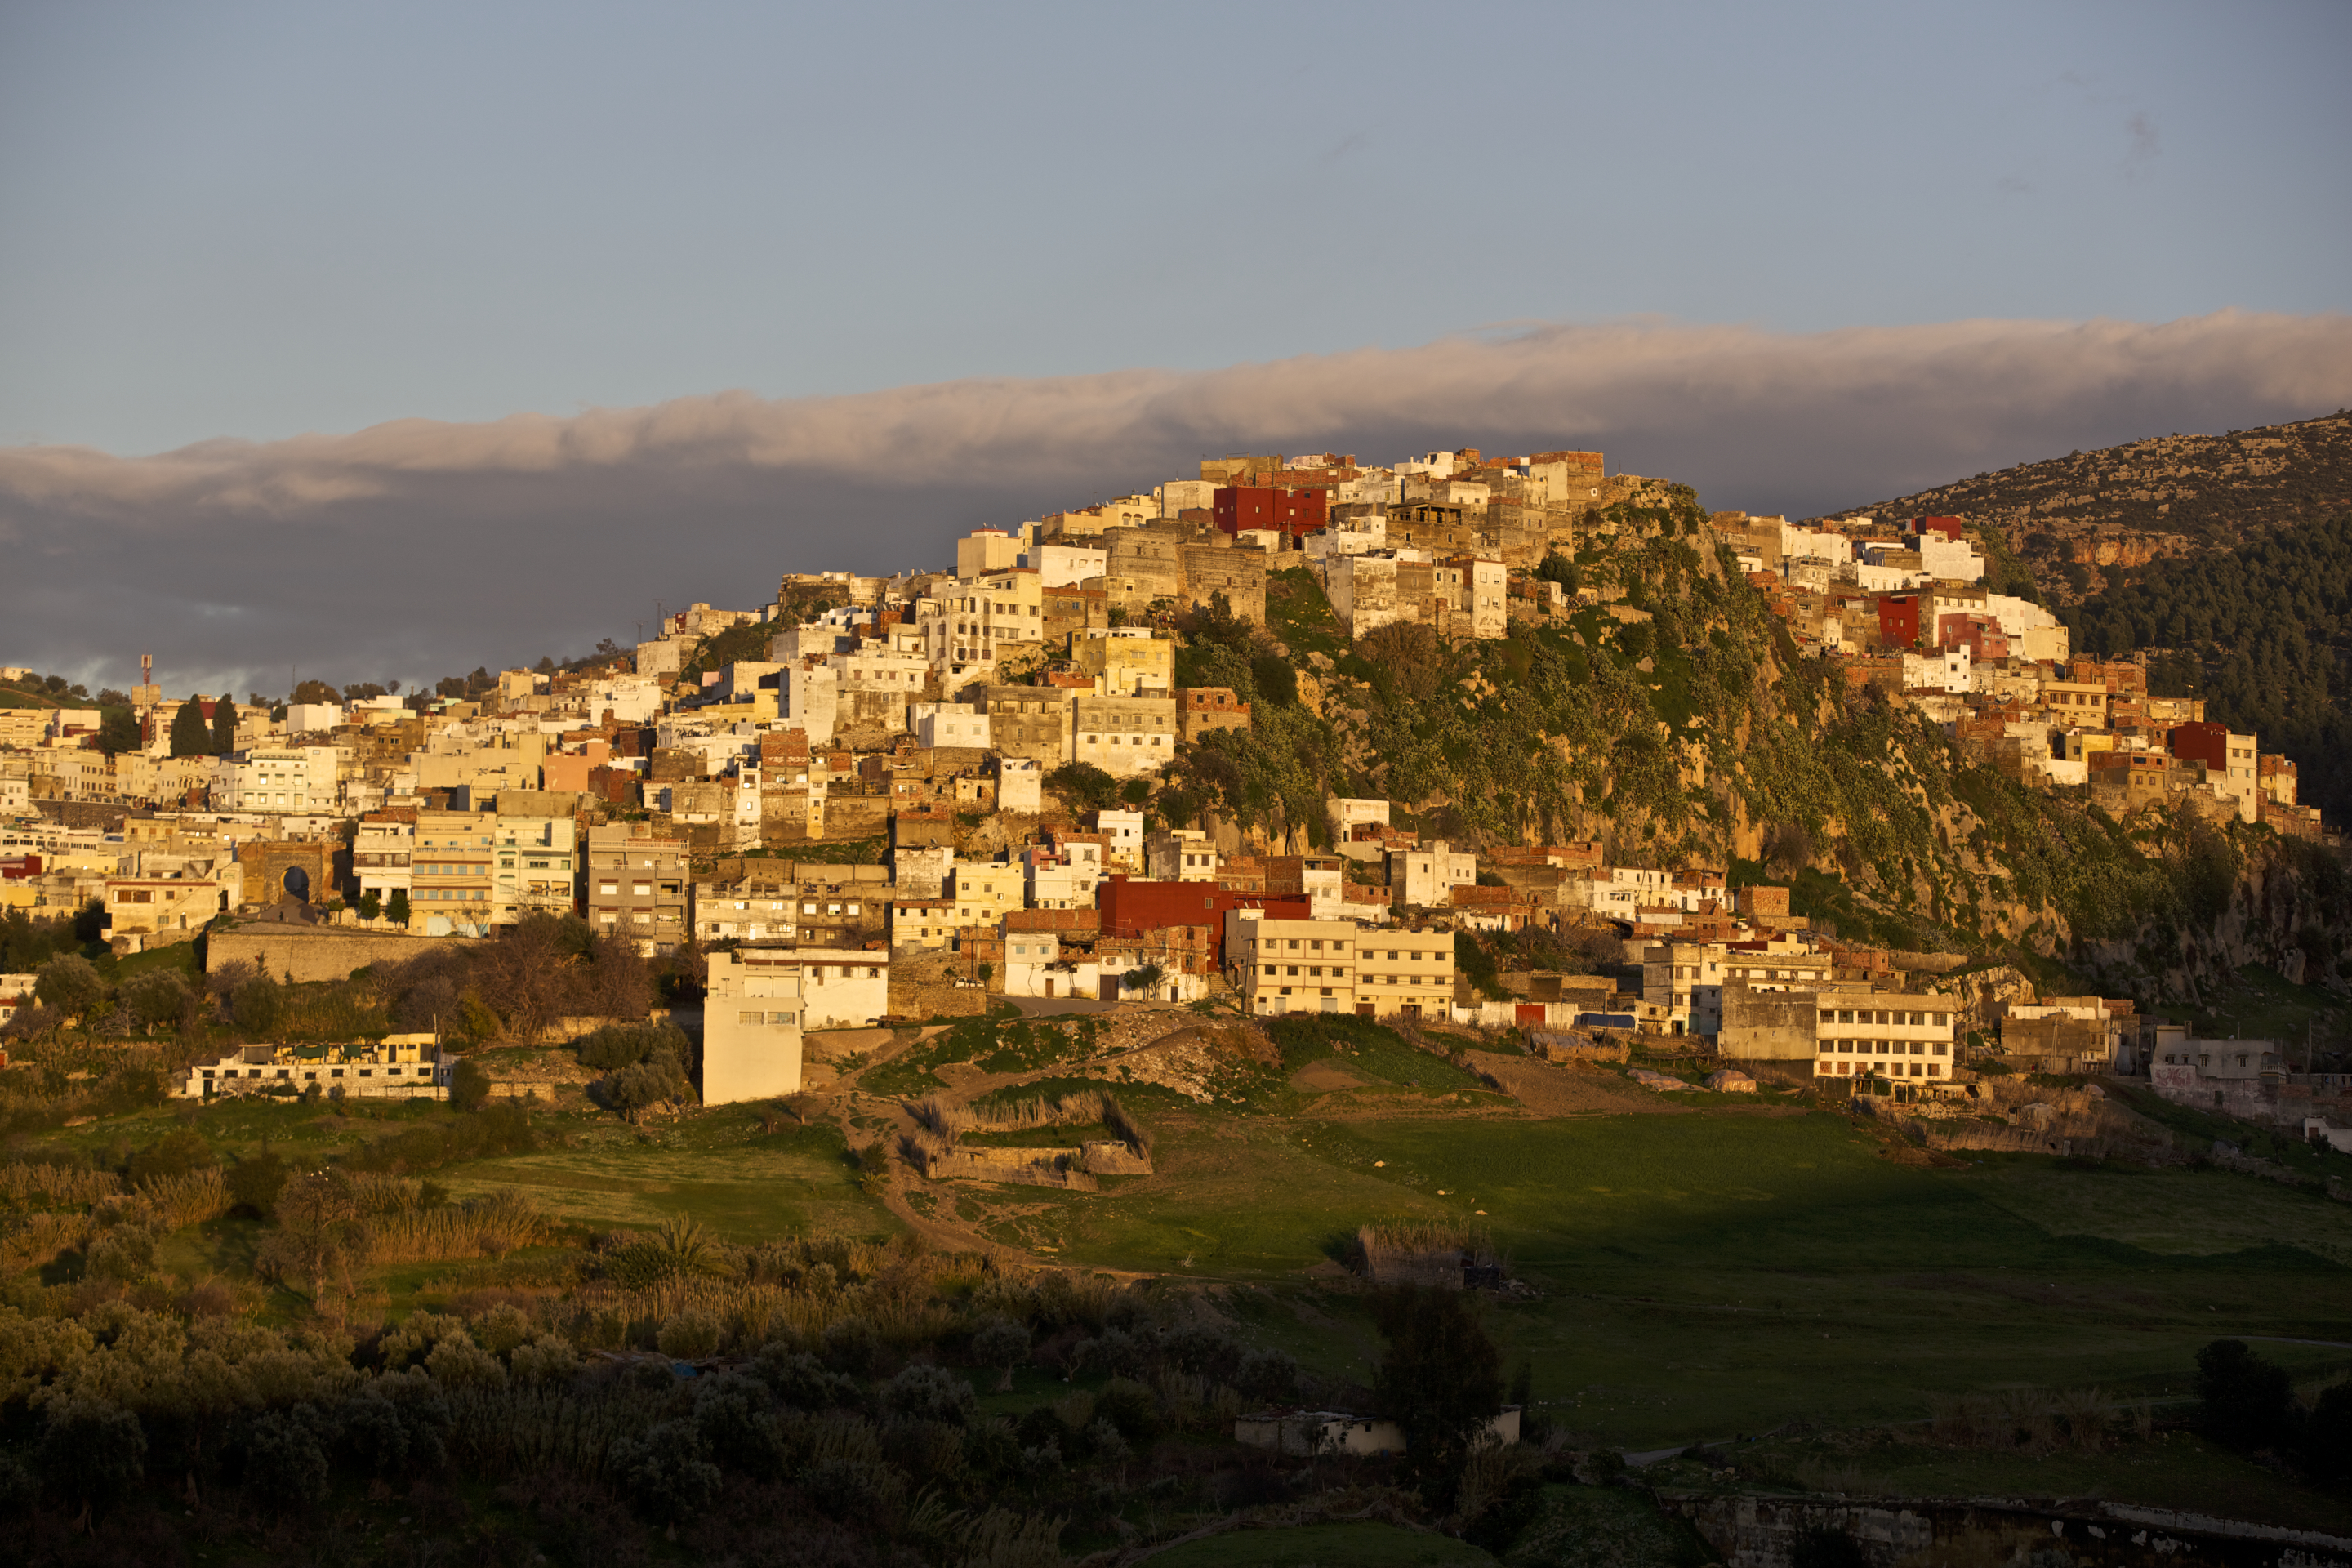 View of Moulay Idriss Zerhoun with old walls and new construction